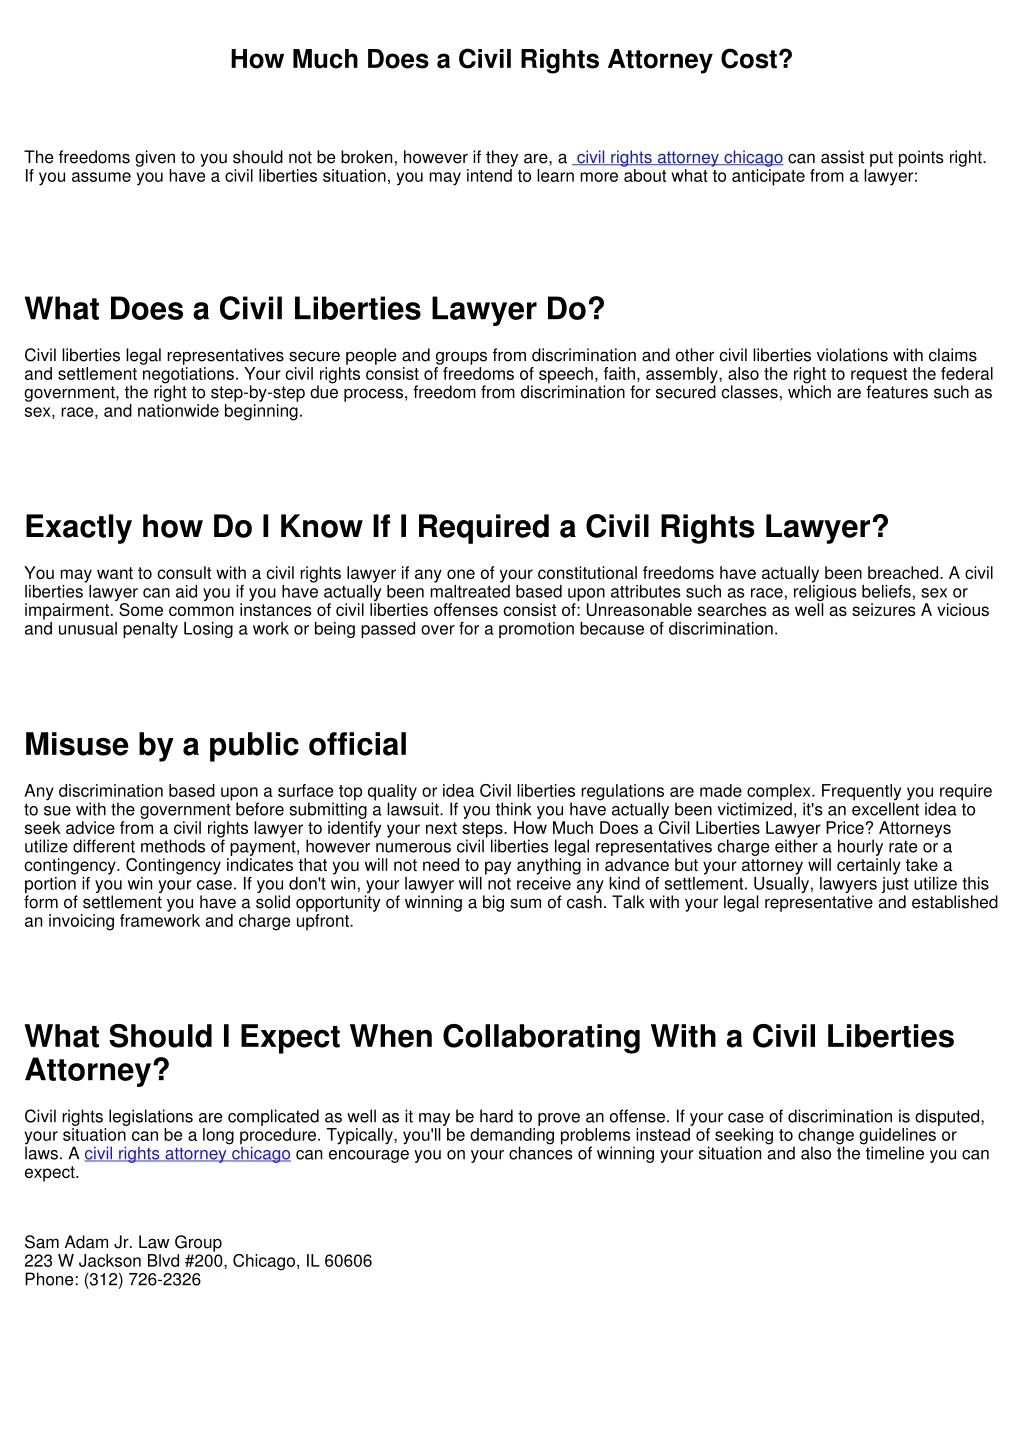 Ppt How Much Does A Civil Rights Lawyer Cost Powerpoint Presentation Id 9033295